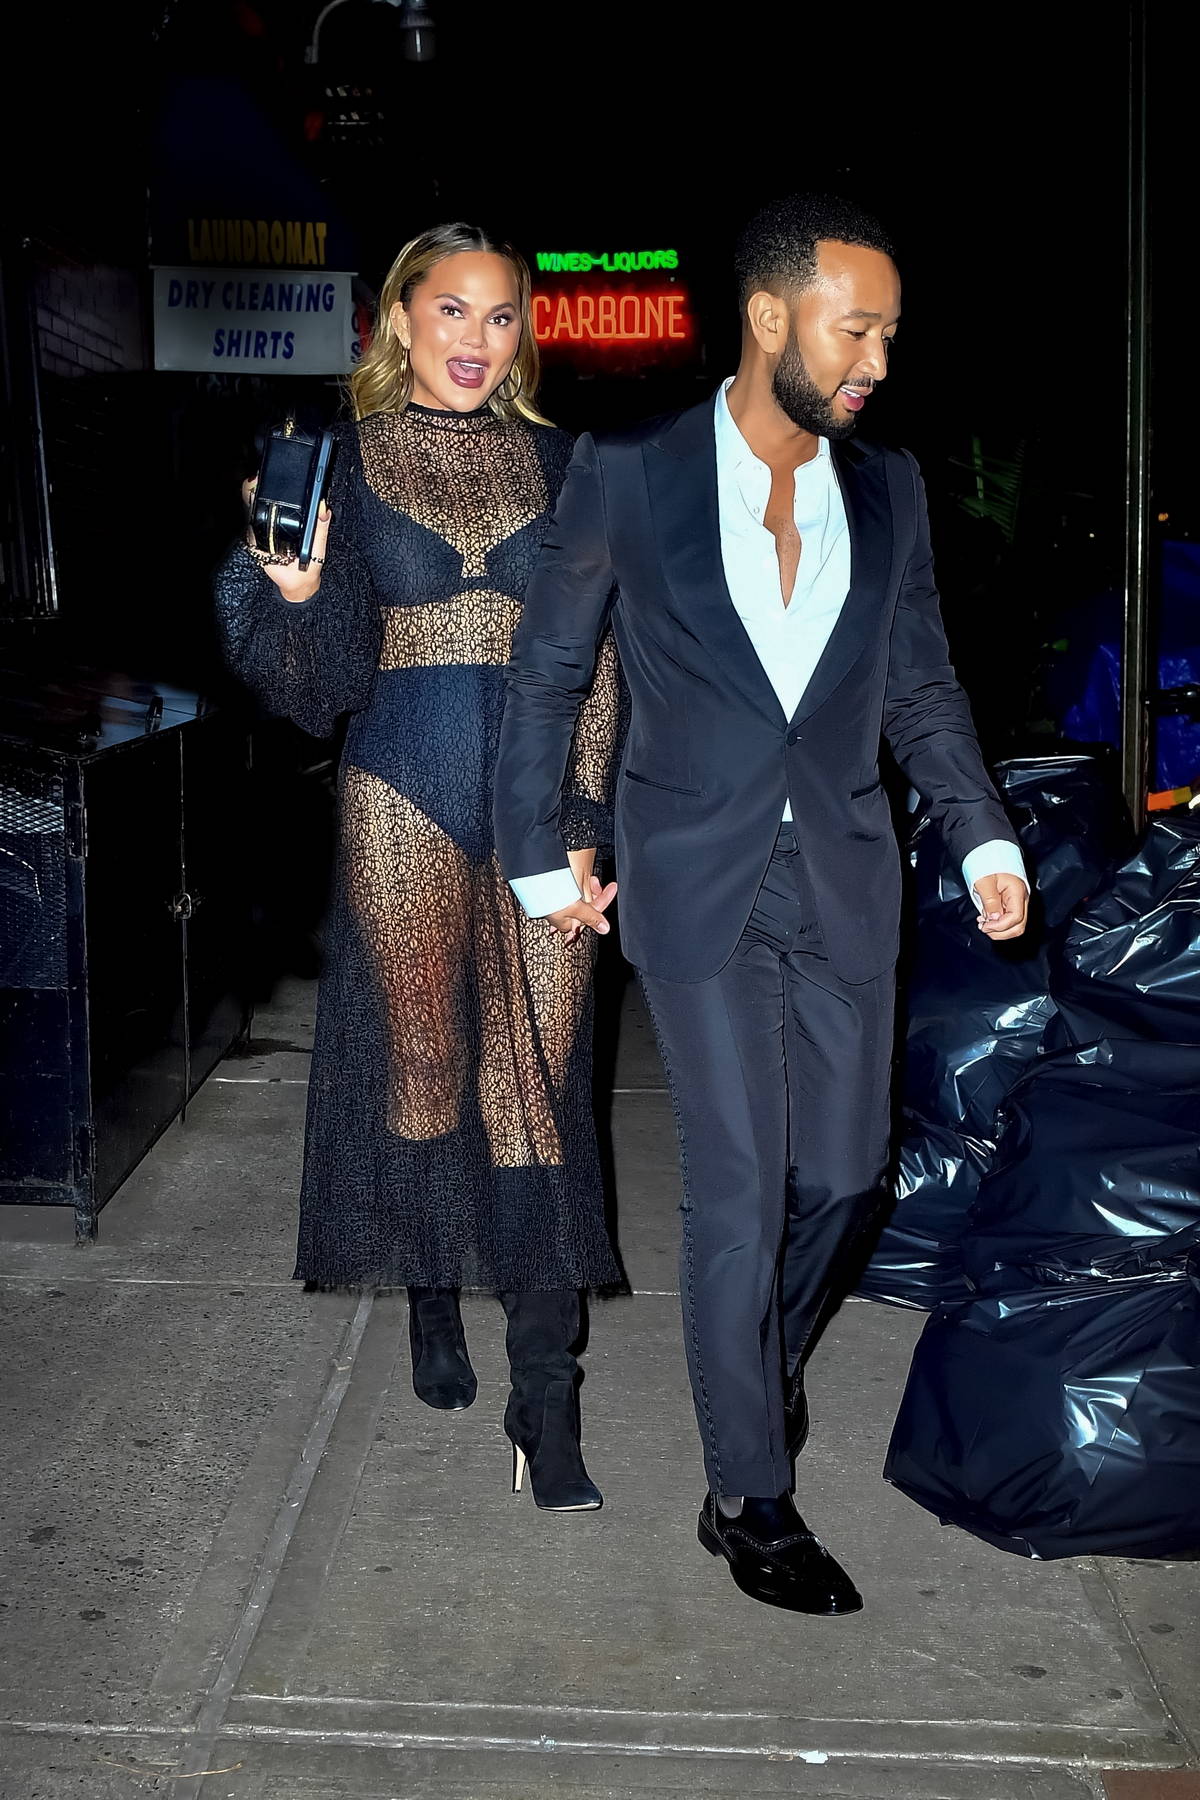 Chrissy Teigen Wore a Sheer Lacy Top for a Date Night at a Drake Concert